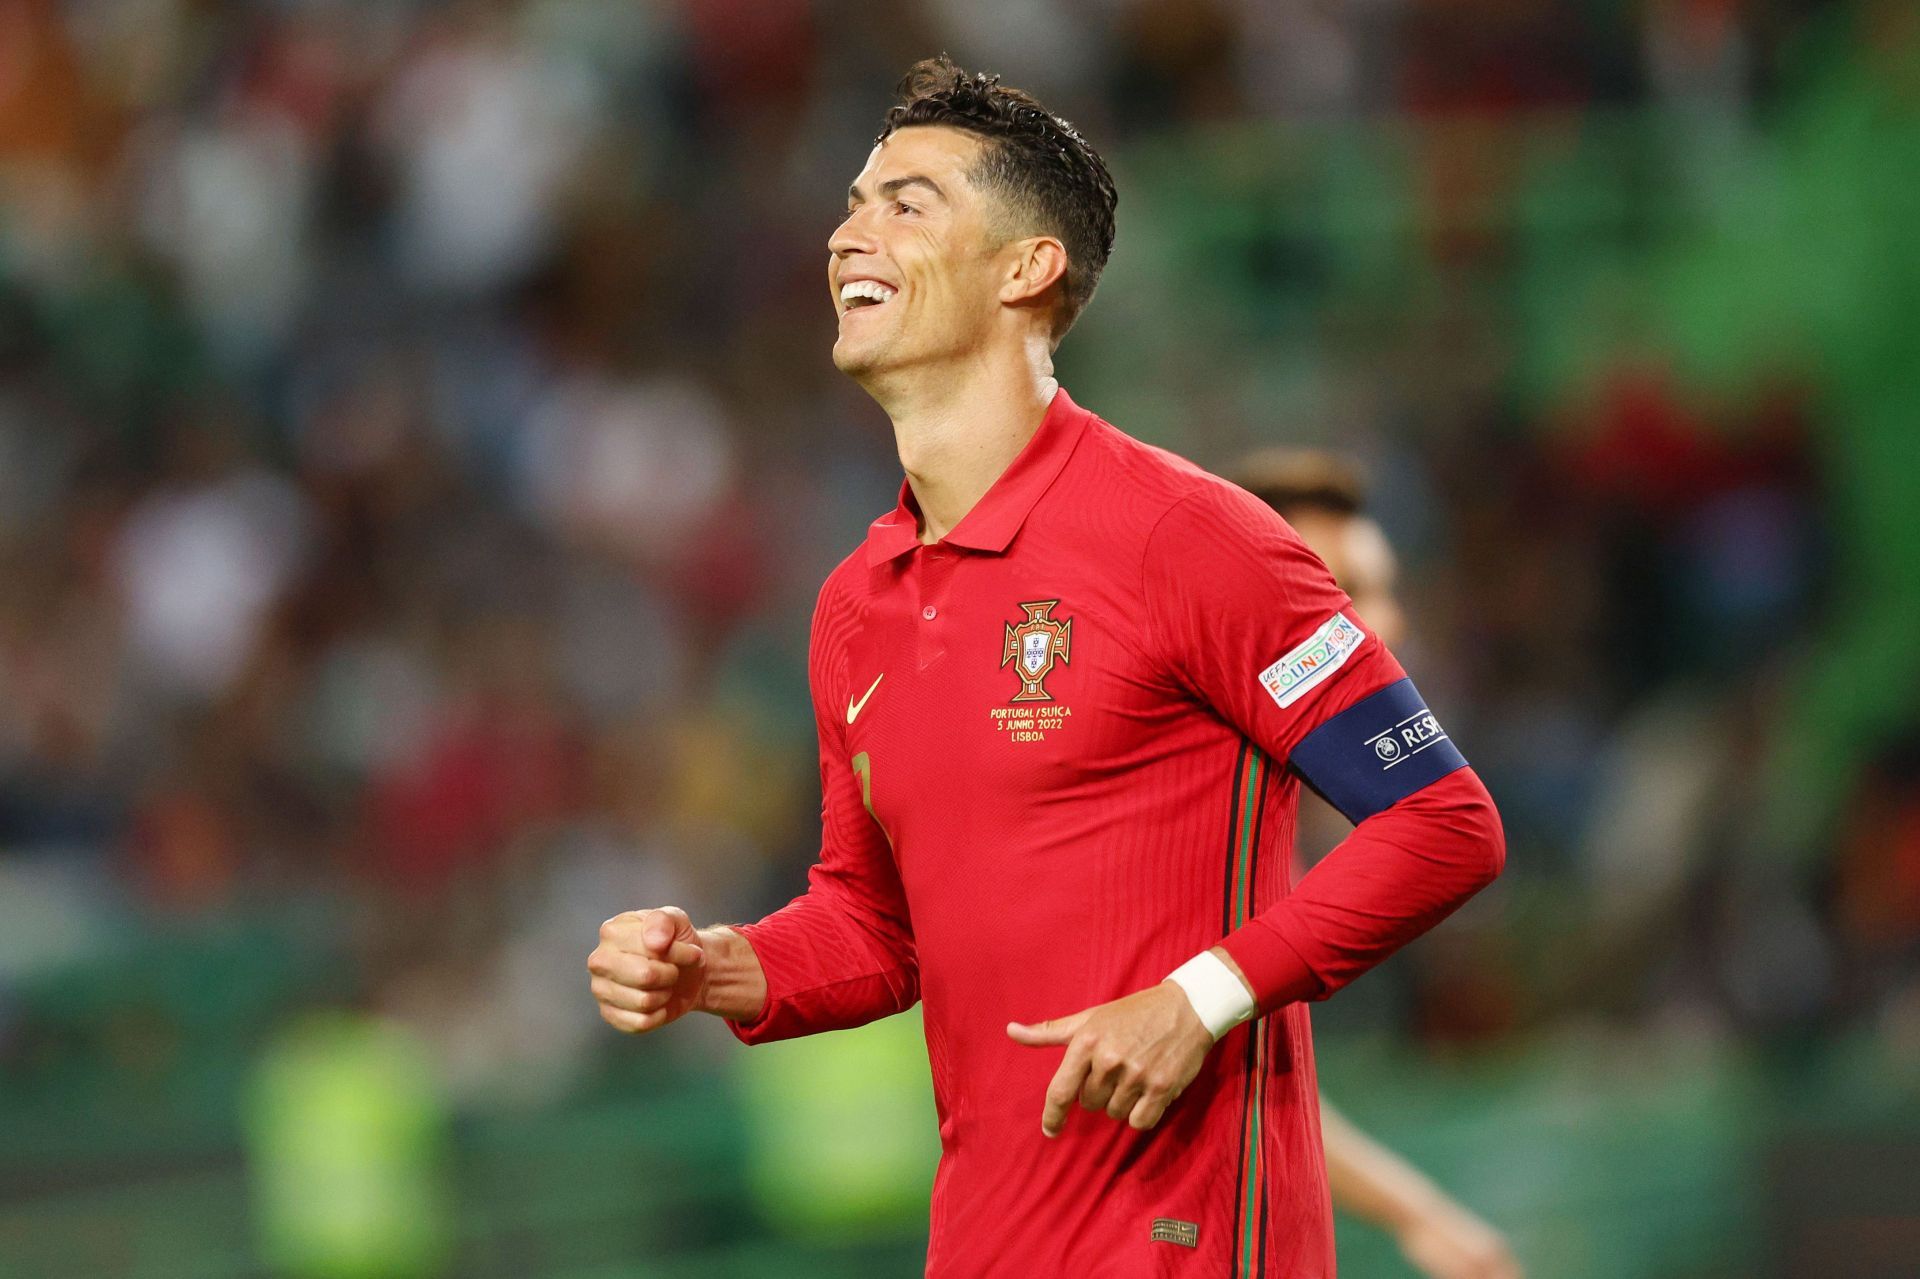 Will Cristiano Ronaldo recover his form in the Nations League this month?